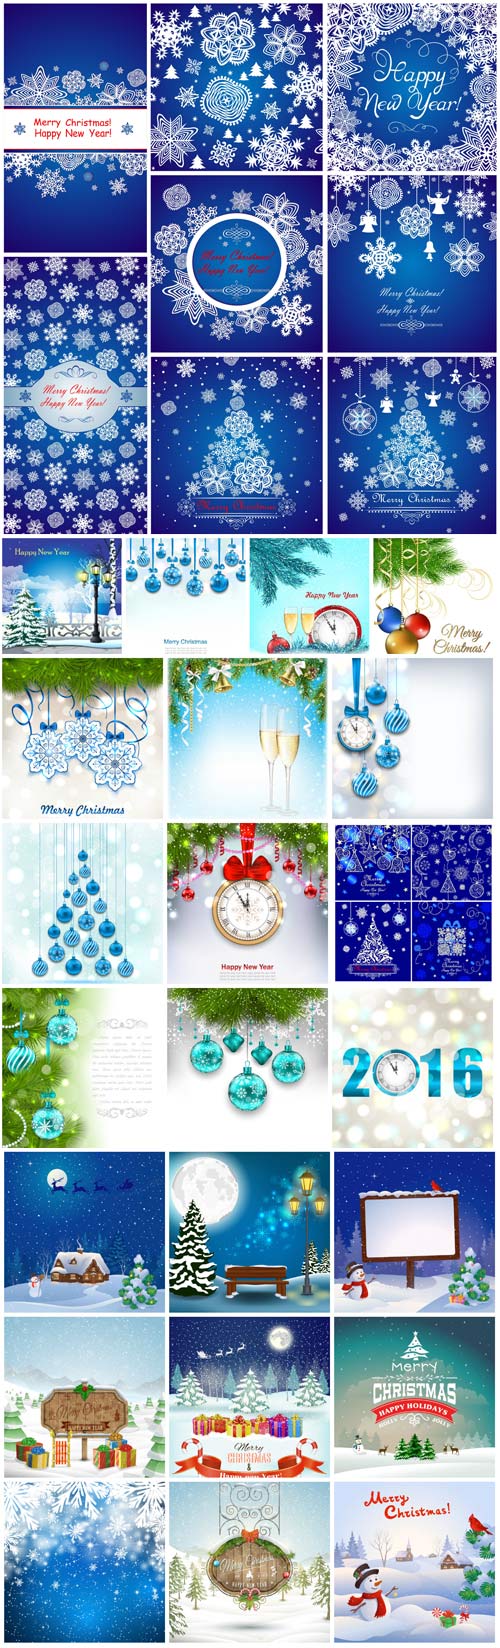 2016 Merry Christmas, New Year, holiday backgrounds vector